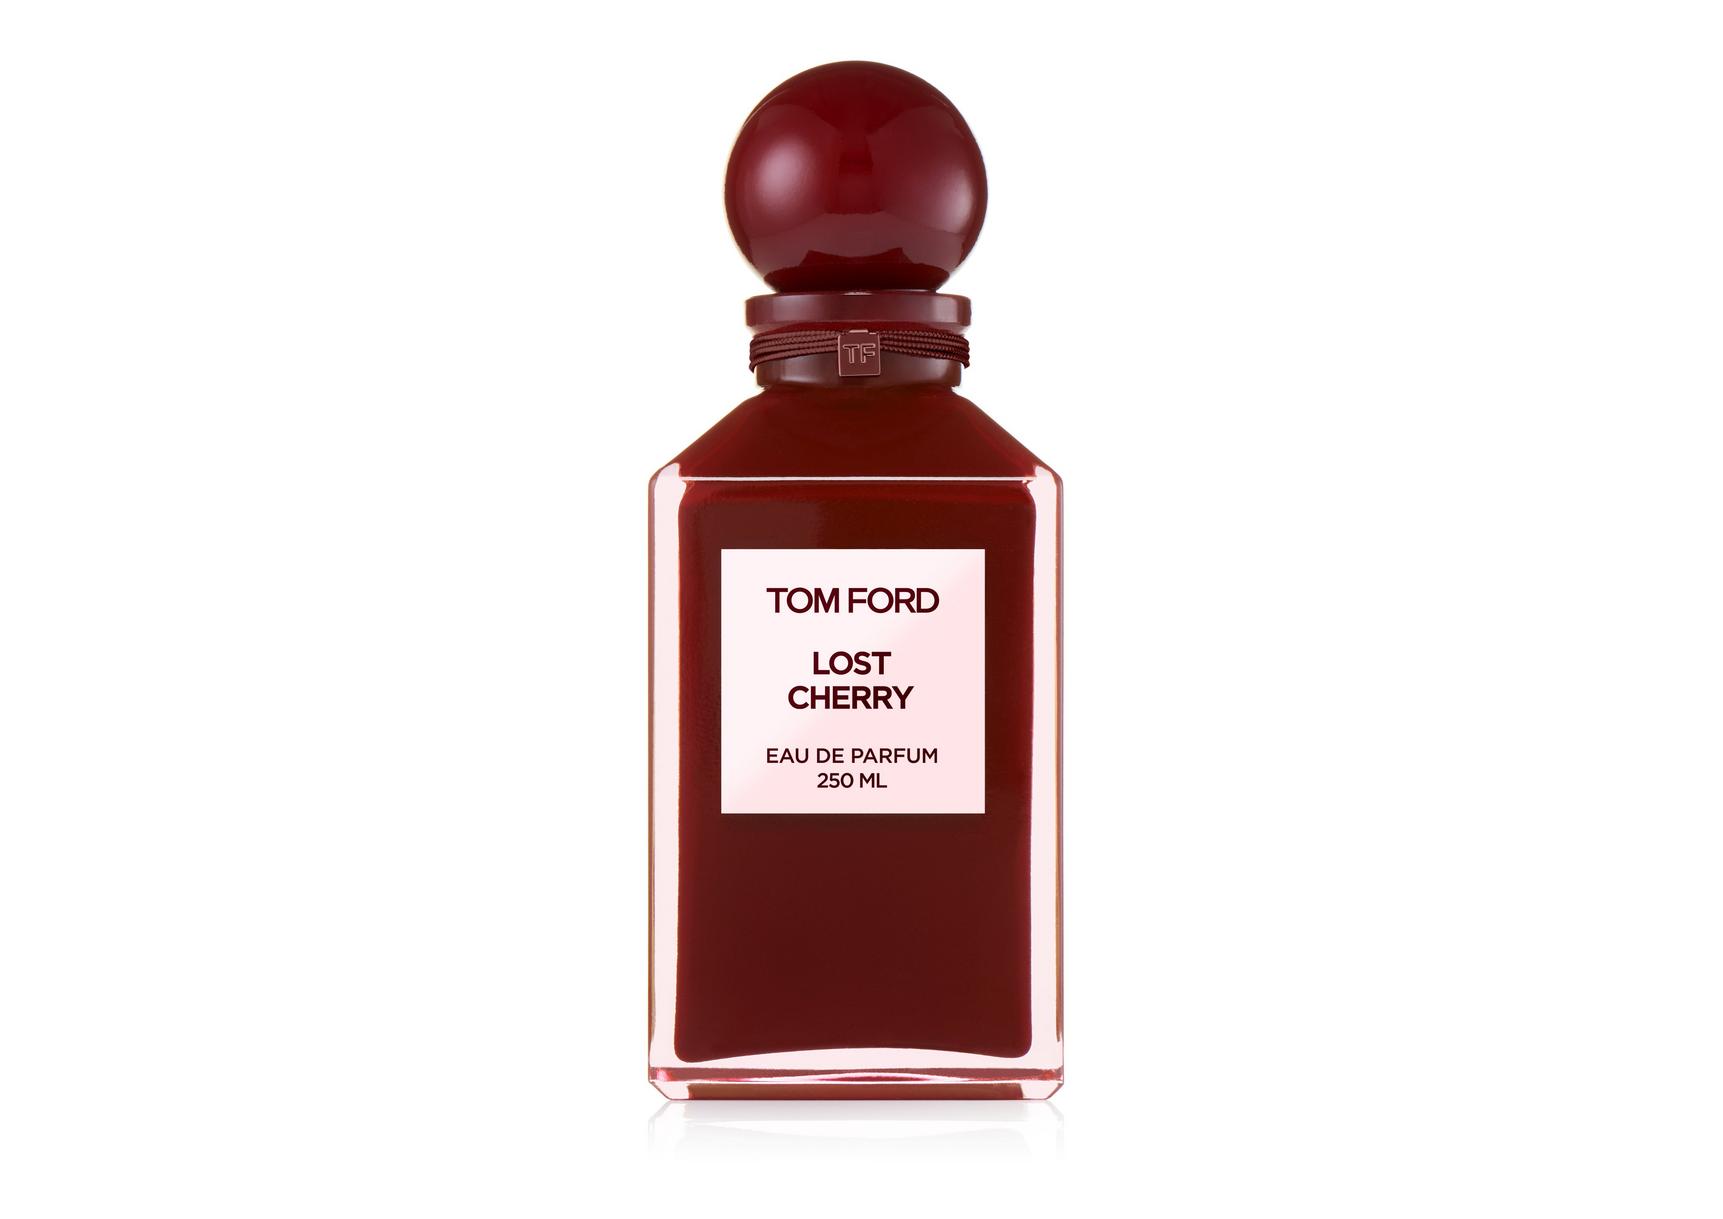 Tom Ford Lost Cherry 250ml | Perfume and Beauty magazine